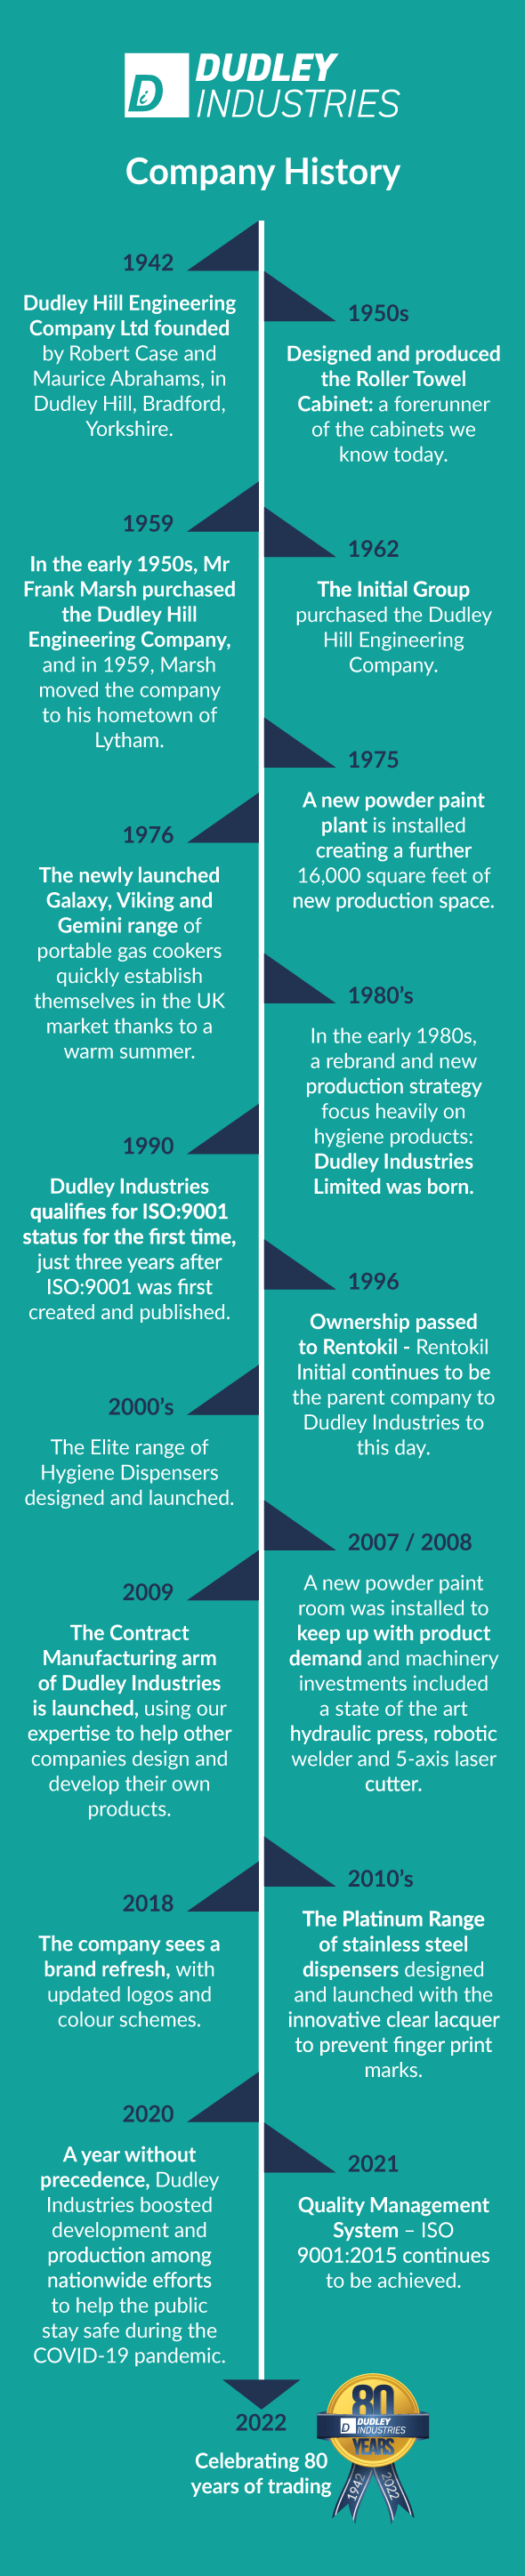 dudley-industries-company-history-timeline-2022